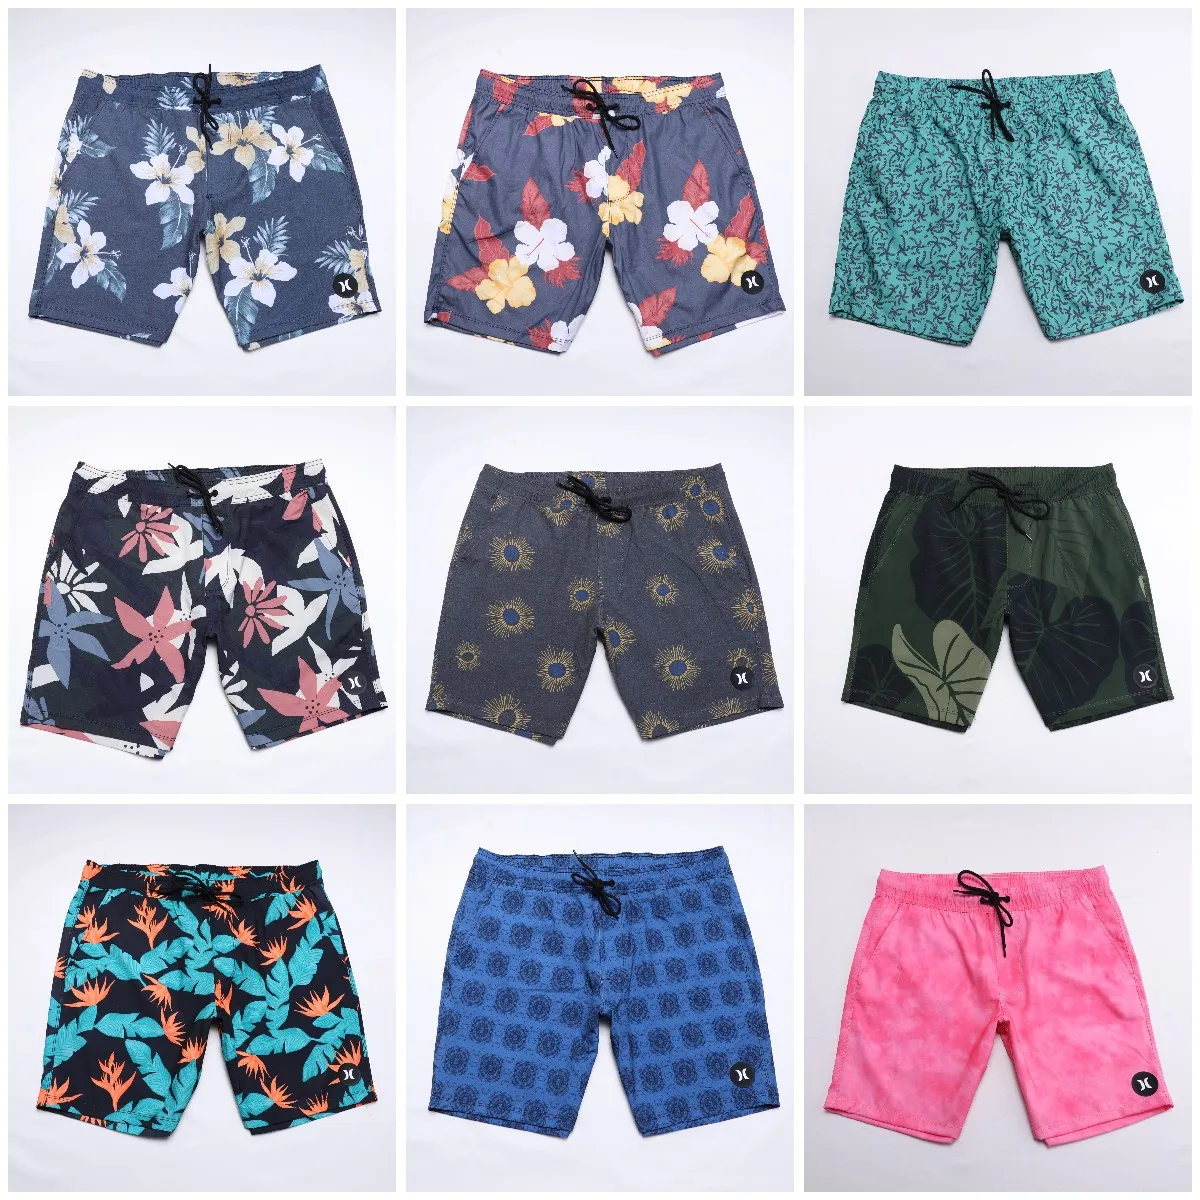 

Hurley Elastic Waist Men Leisure Sports Fitness Vacation Swimming Quick Drying Loose Seaside Surf Beach Shorts Bodybuilding